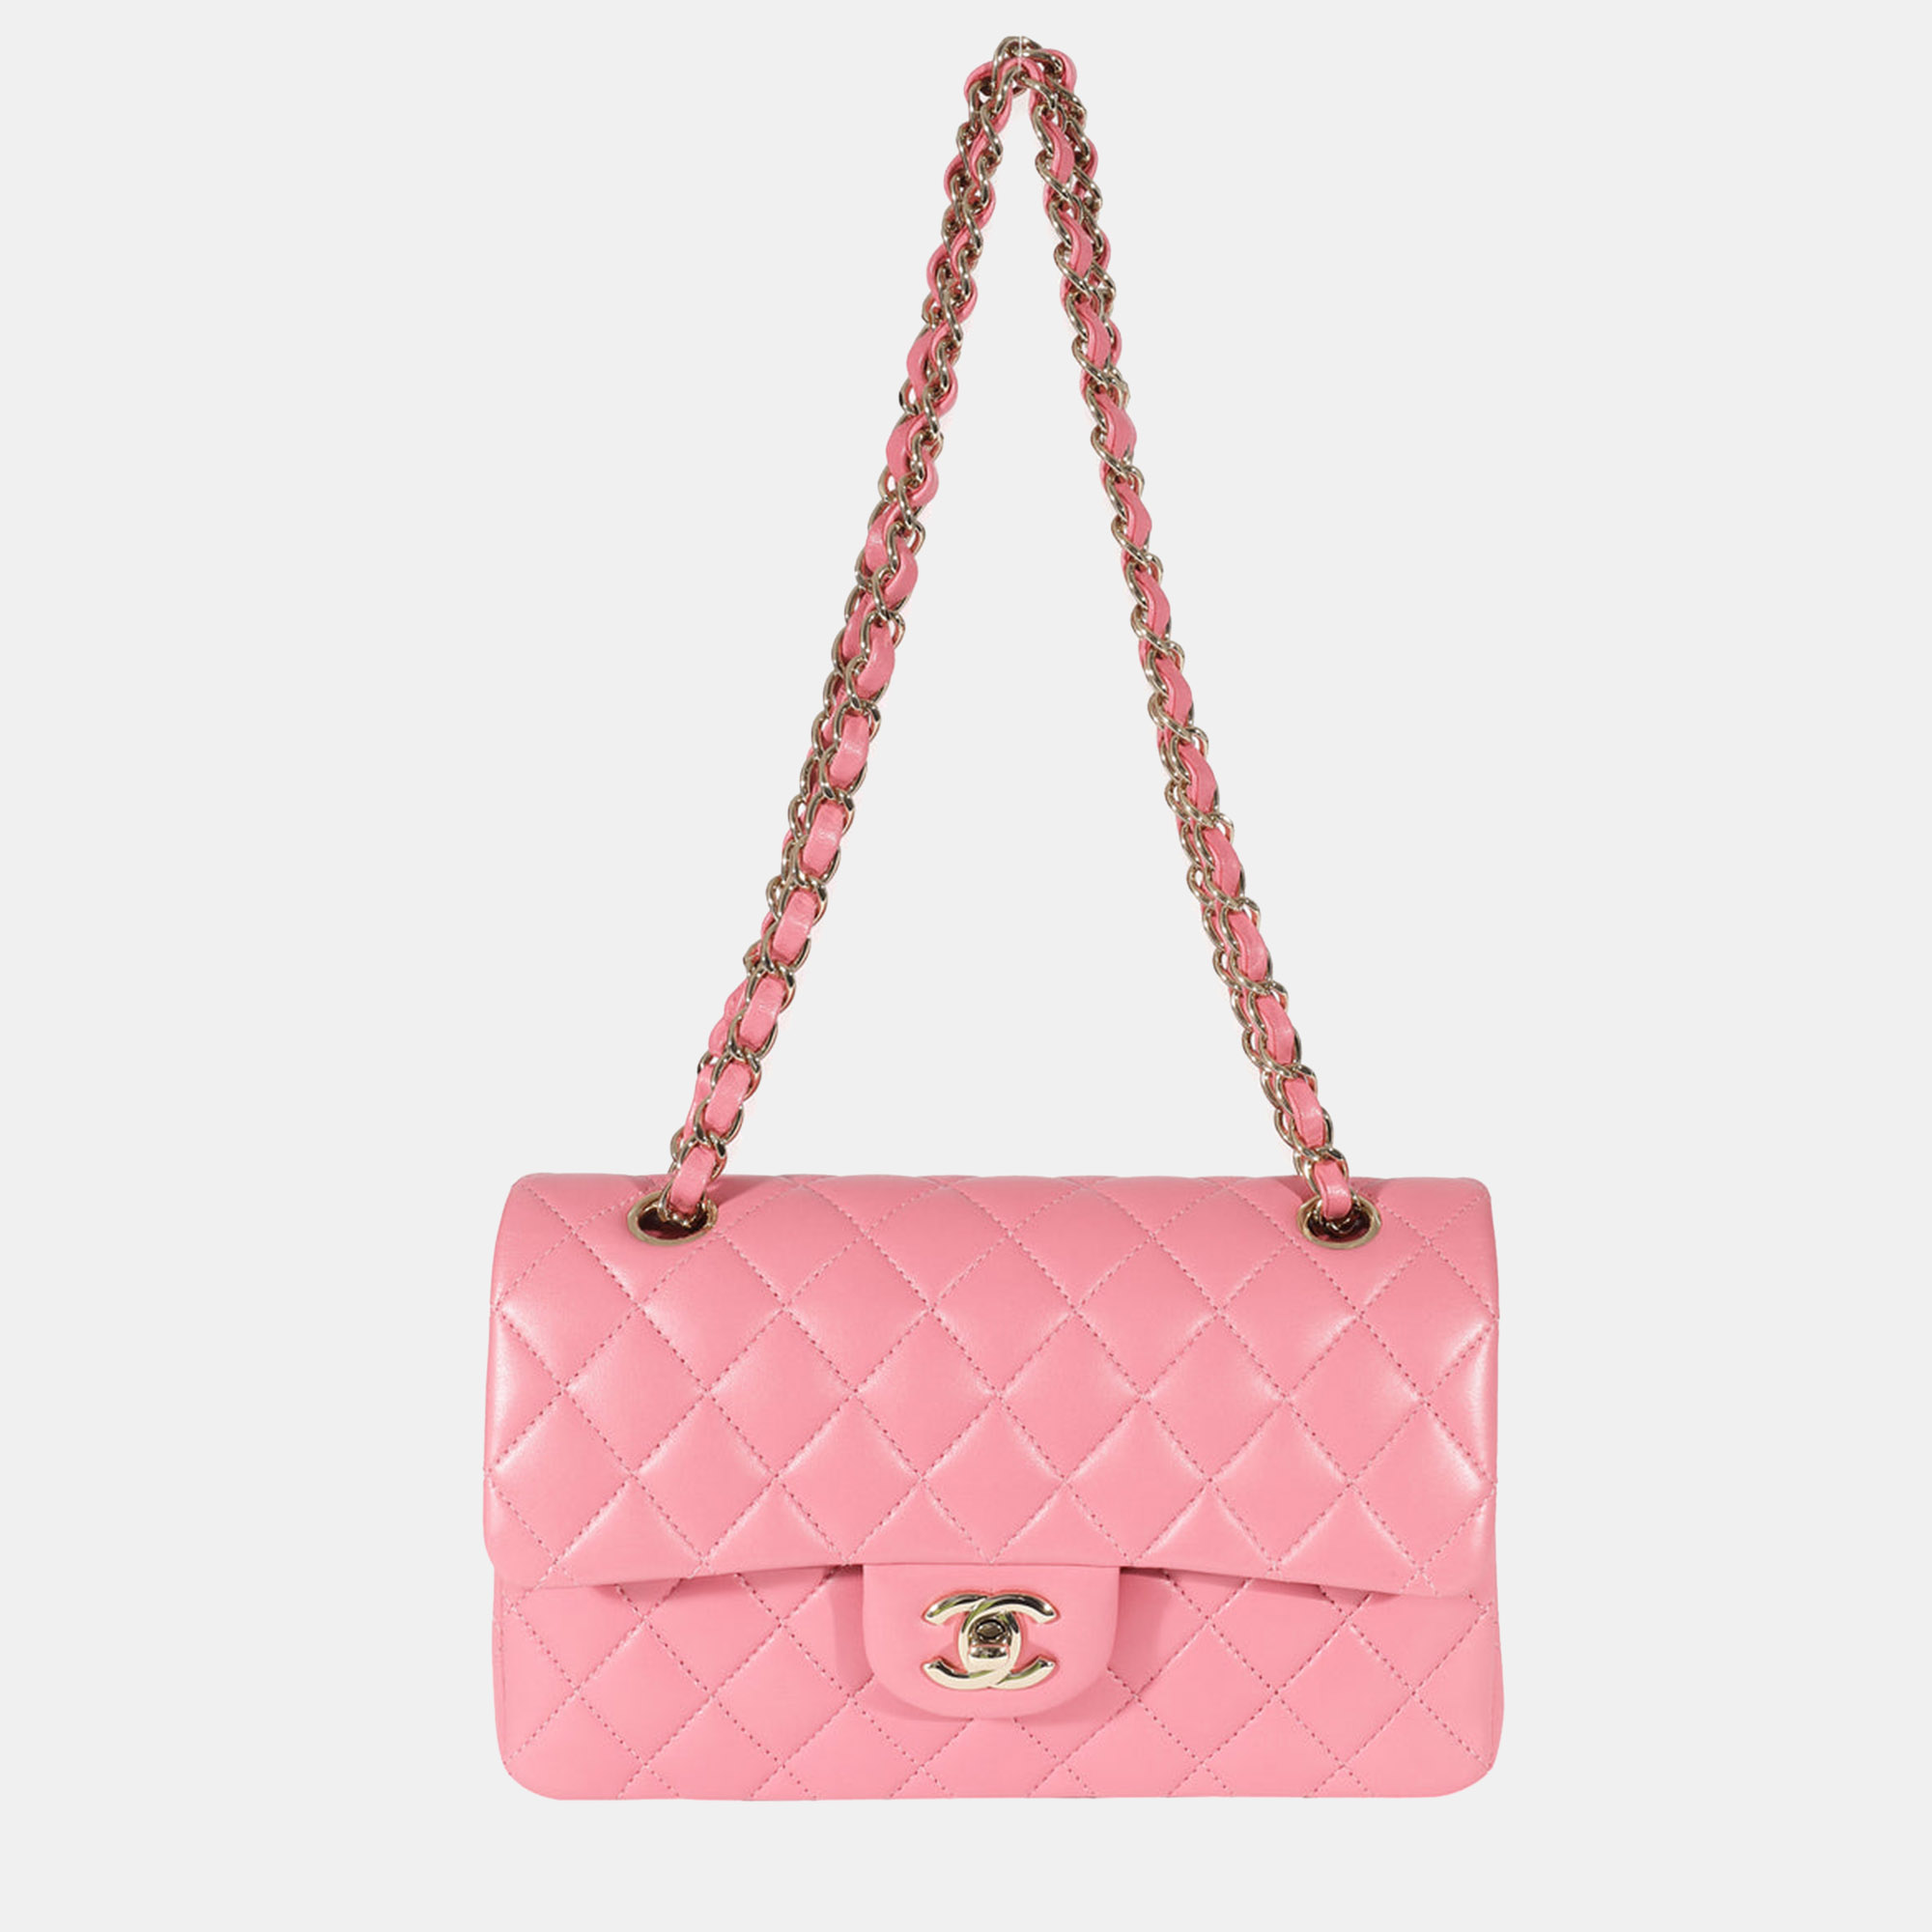 Chanel Pink Lambskin Leather Small Classic Double Flap Shoulder Bag